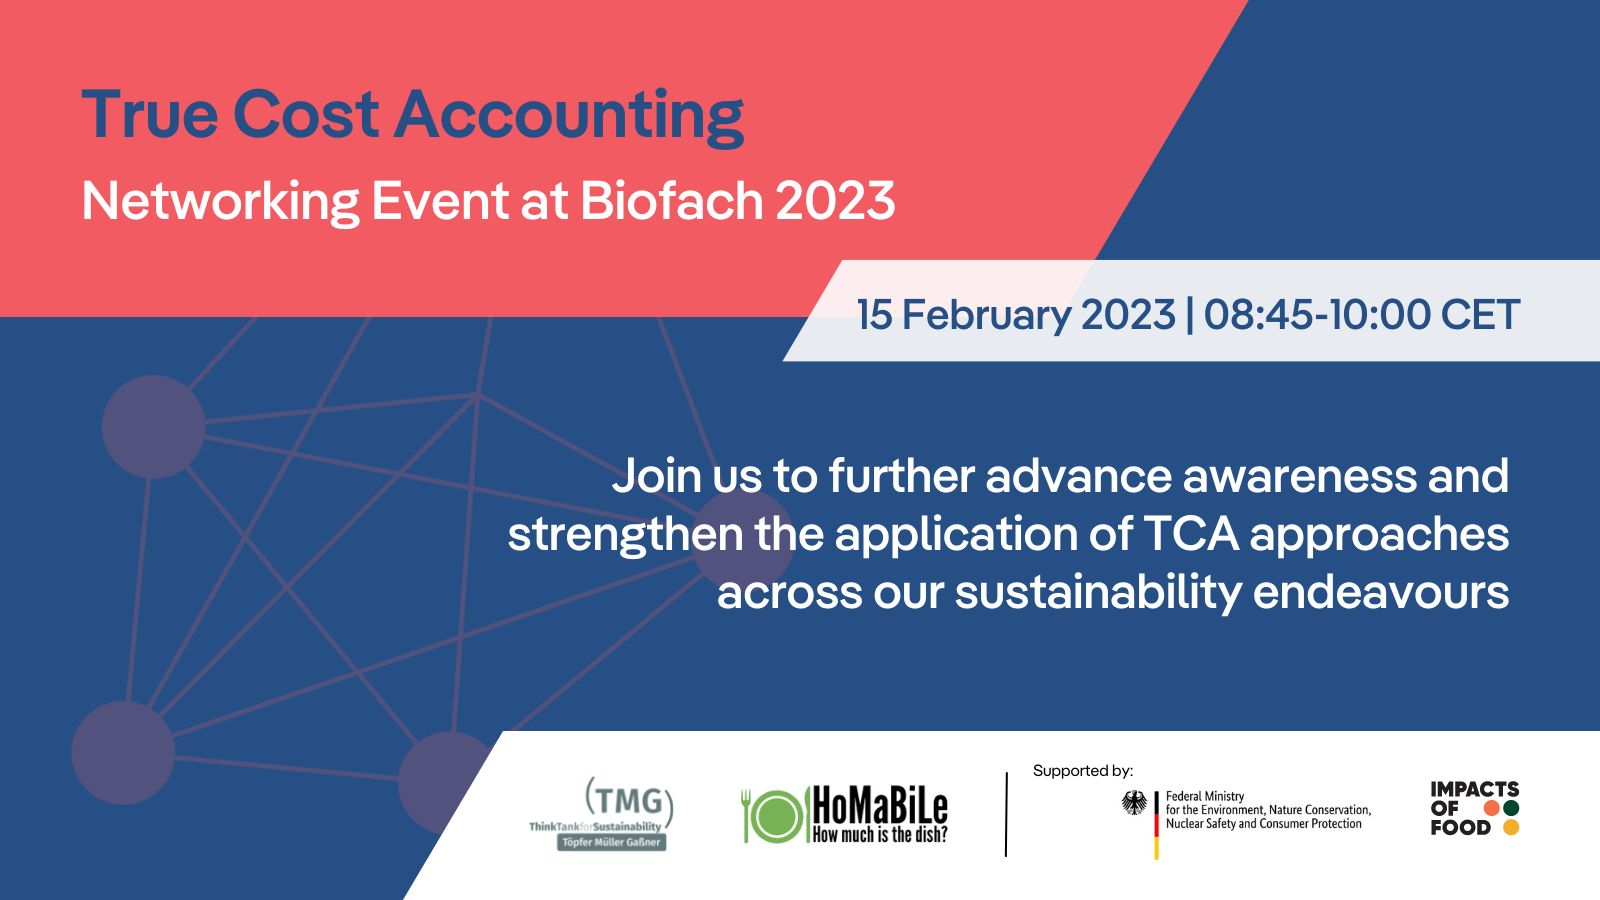 True Cost Accounting Networking Event at Biofach 2023